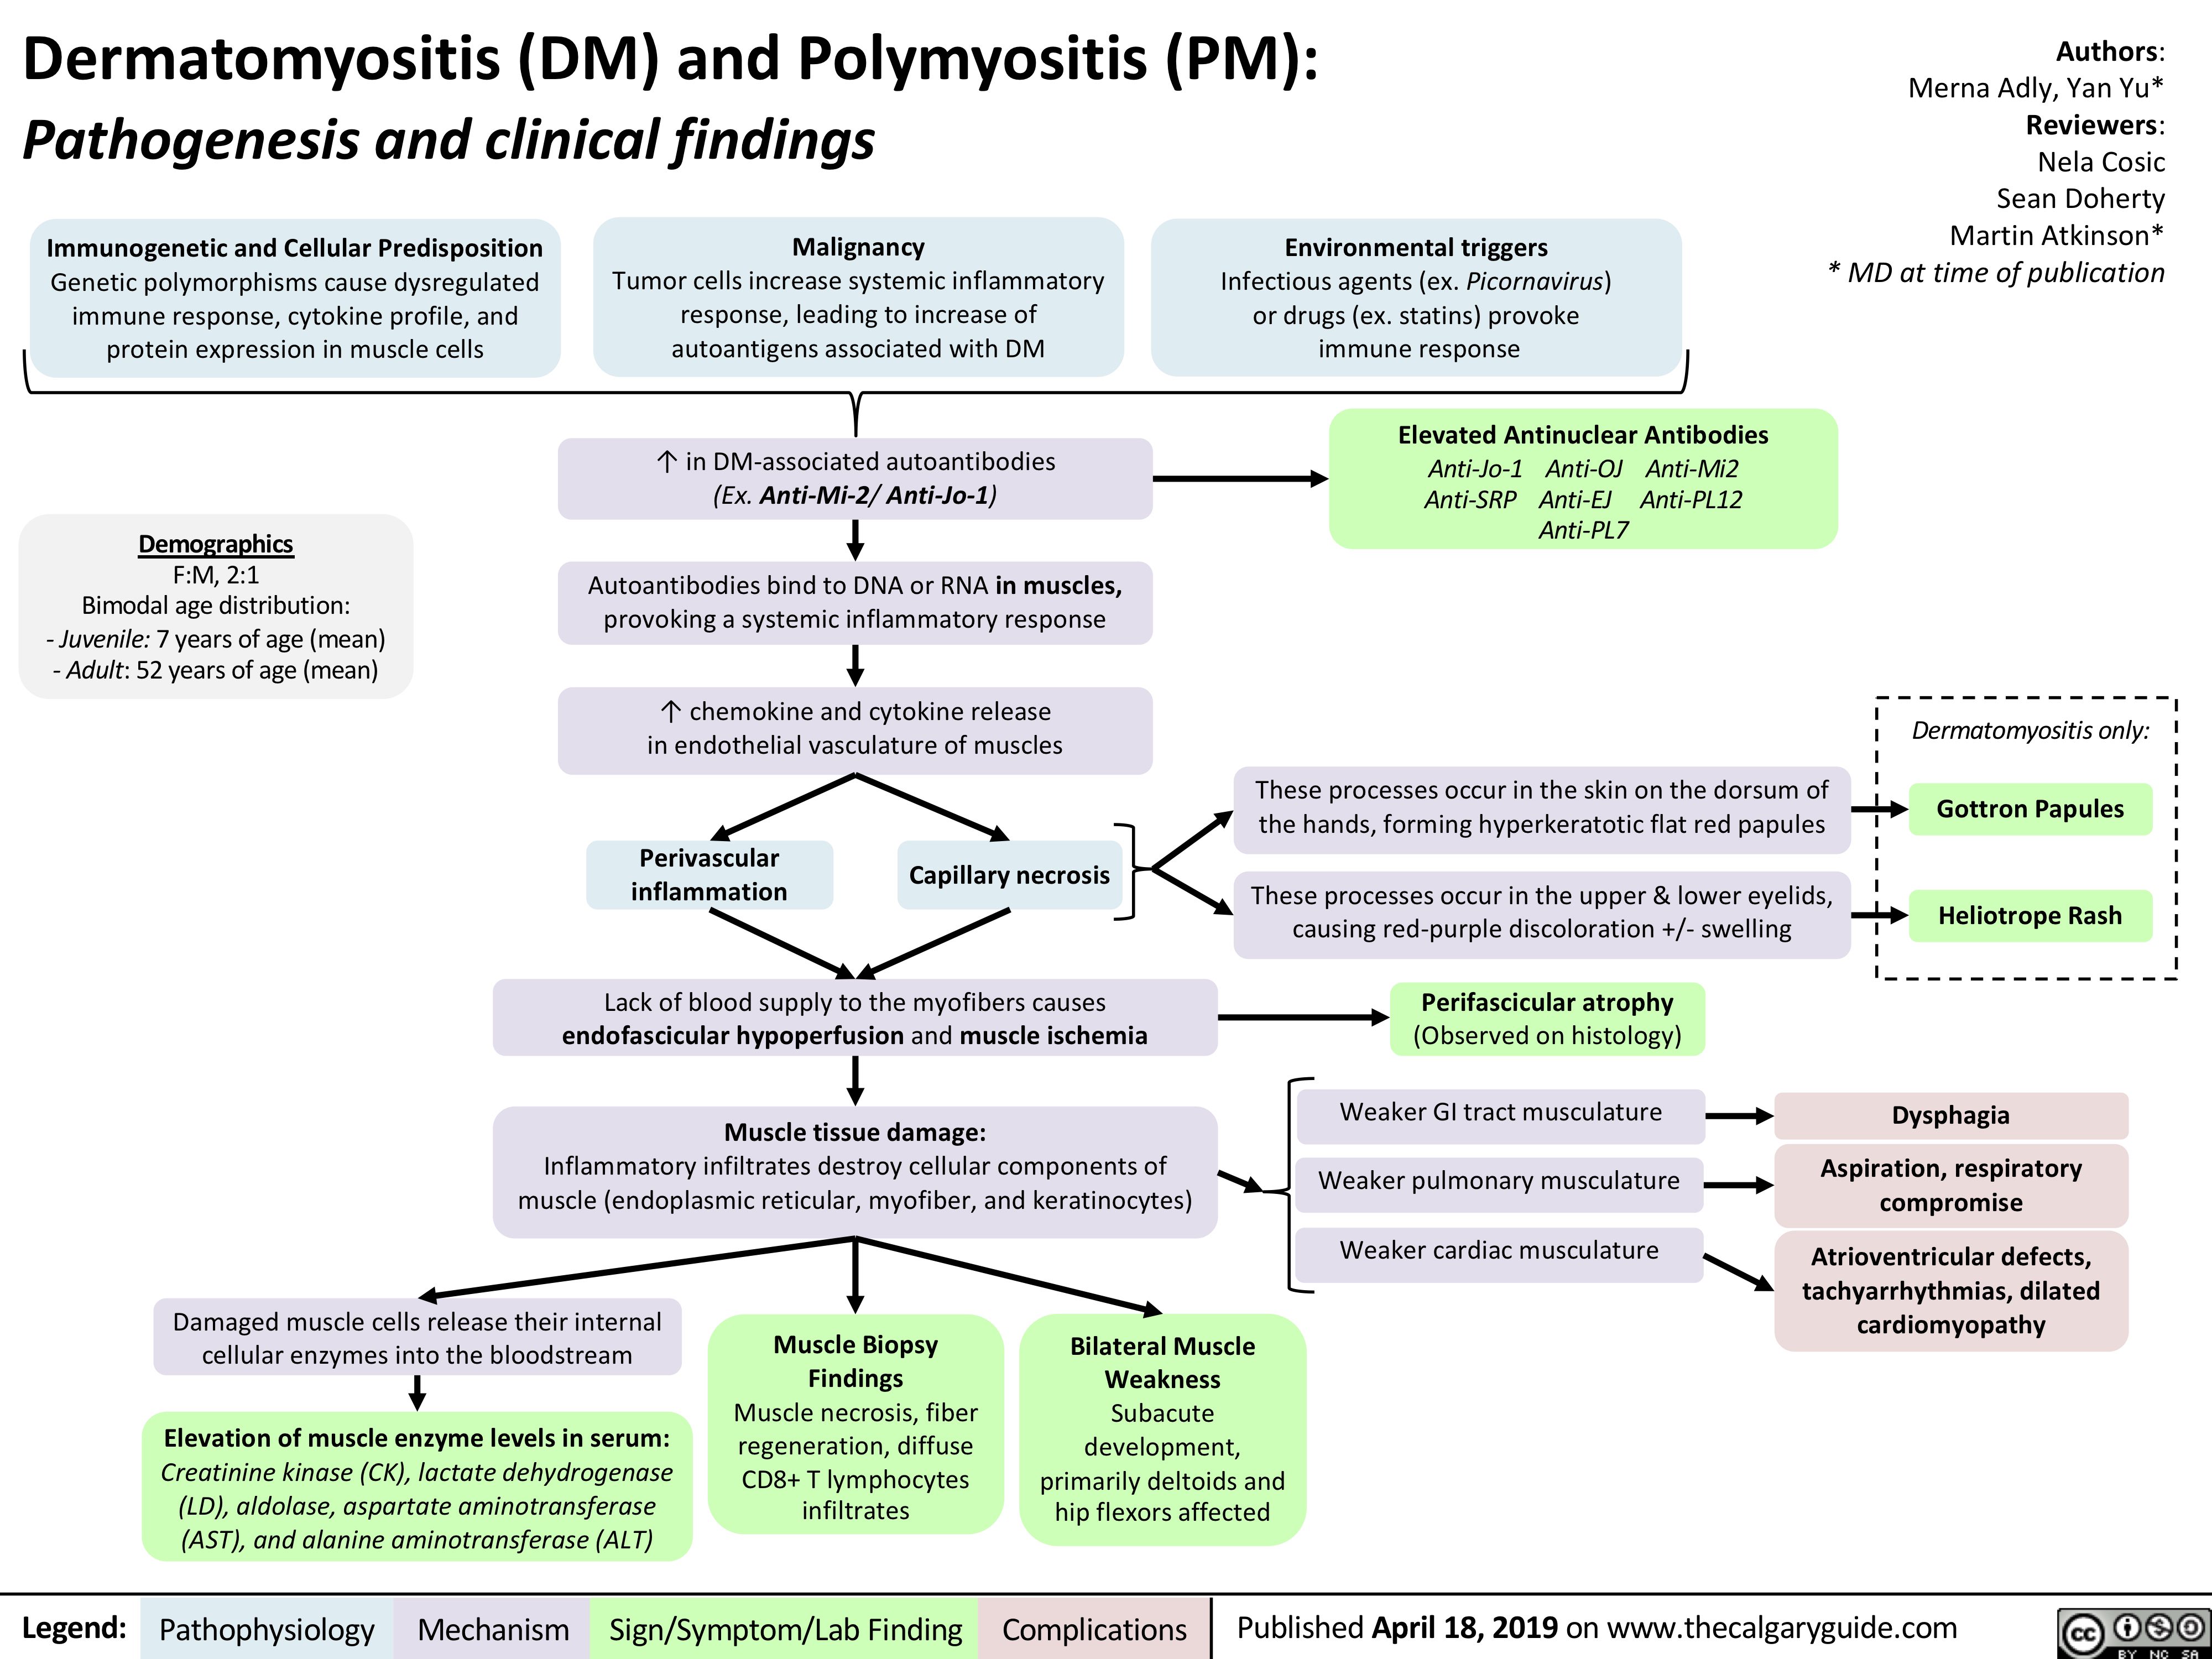 Dermatomyositis (DM) and Polymyositis (PM):
Authors: Merna Adly, Yan Yu* Reviewers: Nela Cosic Sean Doherty Martin Atkinson* * MD at time of publication
Pathogenesis and clinical findings
   Immunogenetic and Cellular Predisposition
Genetic polymorphisms cause dysregulated immune response, cytokine profile, and protein expression in muscle cells
Demographics
F:M, 2:1
Bimodal age distribution:
- Juvenile: 7 years of age (mean) - Adult: 52 years of age (mean)
Malignancy
Tumor cells increase systemic inflammatory response, leading to increase of autoantigens associated with DM
↑ in DM-associated autoantibodies
(Ex. Anti-Mi-2/ Anti-Jo-1) Autoantibodies bind to DNA or RNA in muscles,
provoking a systemic inflammatory response
↑ chemokine and cytokine release in endothelial vasculature of muscles
Perivascular Capillary necrosis inflammation
Lack of blood supply to the myofibers causes endofascicular hypoperfusion and muscle ischemia
Muscle tissue damage:
Inflammatory infiltrates destroy cellular components of muscle (endoplasmic reticular, myofiber, and keratinocytes)
Environmental triggers
Infectious agents (ex. Picornavirus) or drugs (ex. statins) provoke immune response
Elevated Antinuclear Antibodies
Anti-Jo-1 Anti-OJ Anti-Mi2 Anti-SRP Anti-EJ Anti-PL12 Anti-PL7
These processes occur in the skin on the dorsum of the hands, forming hyperkeratotic flat red papules
These processes occur in the upper & lower eyelids, causing red-purple discoloration +/- swelling
Perifascicular atrophy
(Observed on histology)
Weaker GI tract musculature Weaker pulmonary musculature Weaker cardiac musculature
           Dermatomyositis only:
Gottron Papules Heliotrope Rash
                                  Damaged muscle cells release their internal cellular enzymes into the bloodstream
Elevation of muscle enzyme levels in serum:
Creatinine kinase (CK), lactate dehydrogenase (LD), aldolase, aspartate aminotransferase (AST), and alanine aminotransferase (ALT)
Muscle Biopsy Findings Muscle necrosis, fiber regeneration, diffuse CD8+ T lymphocytes infiltrates
Bilateral Muscle Weakness Subacute development, primarily deltoids and hip flexors affected
Dysphagia
Aspiration, respiratory compromise
Atrioventricular defects, tachyarrhythmias, dilated cardiomyopathy
     Legend:
 Pathophysiology
 Mechanism
Sign/Symptom/Lab Finding
  Complications
Published April 18, 2019 on www.thecalgaryguide.com
   